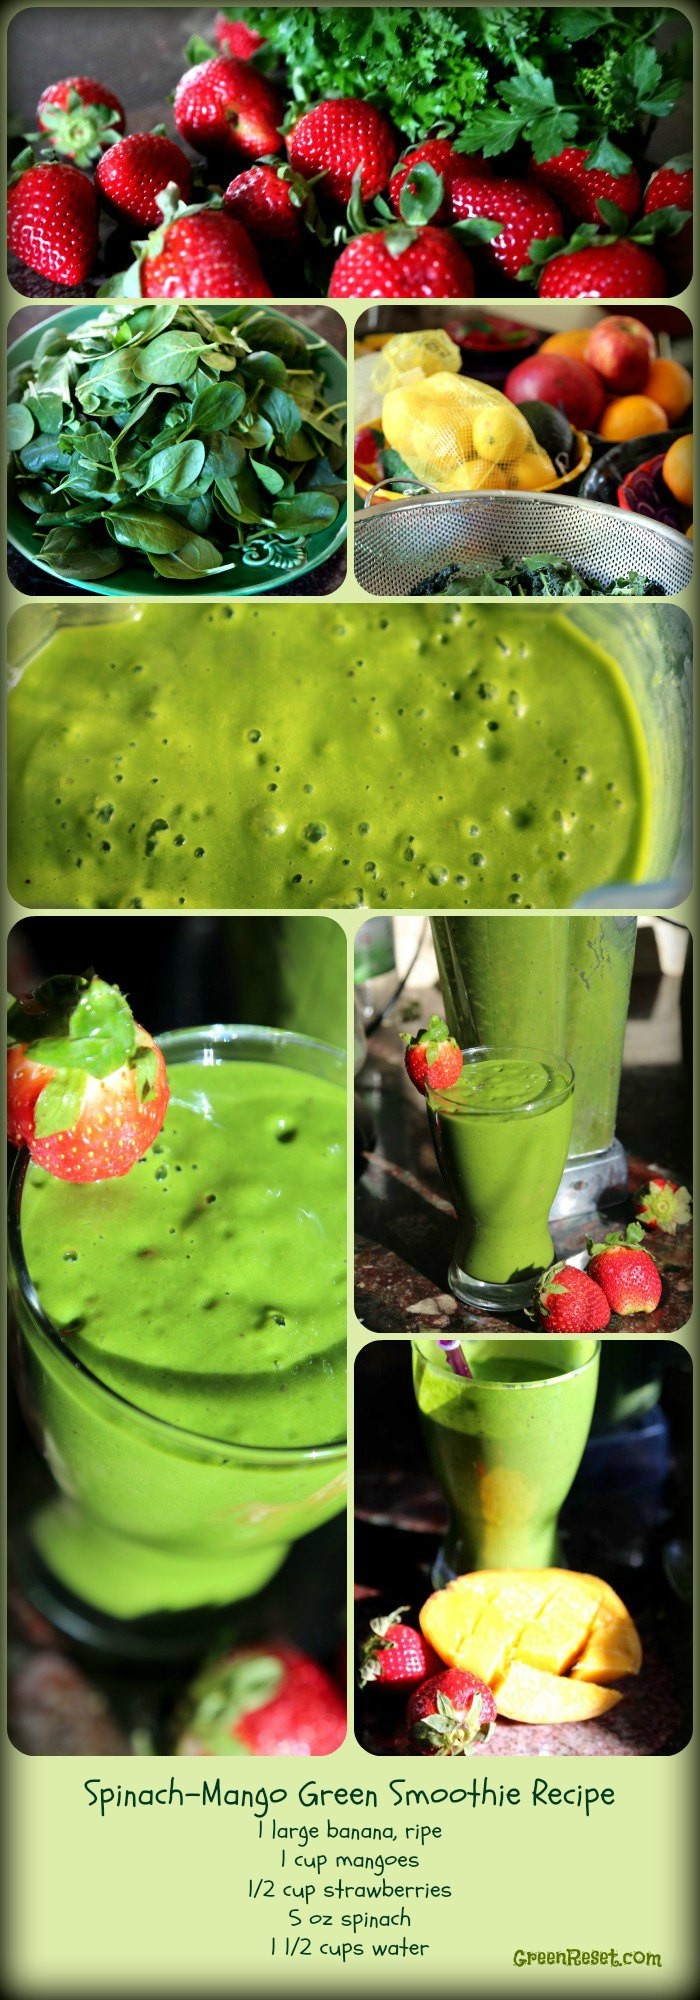 Vegetable Smoothies That Taste Good
 10 Spinach Recipes for Smoothies